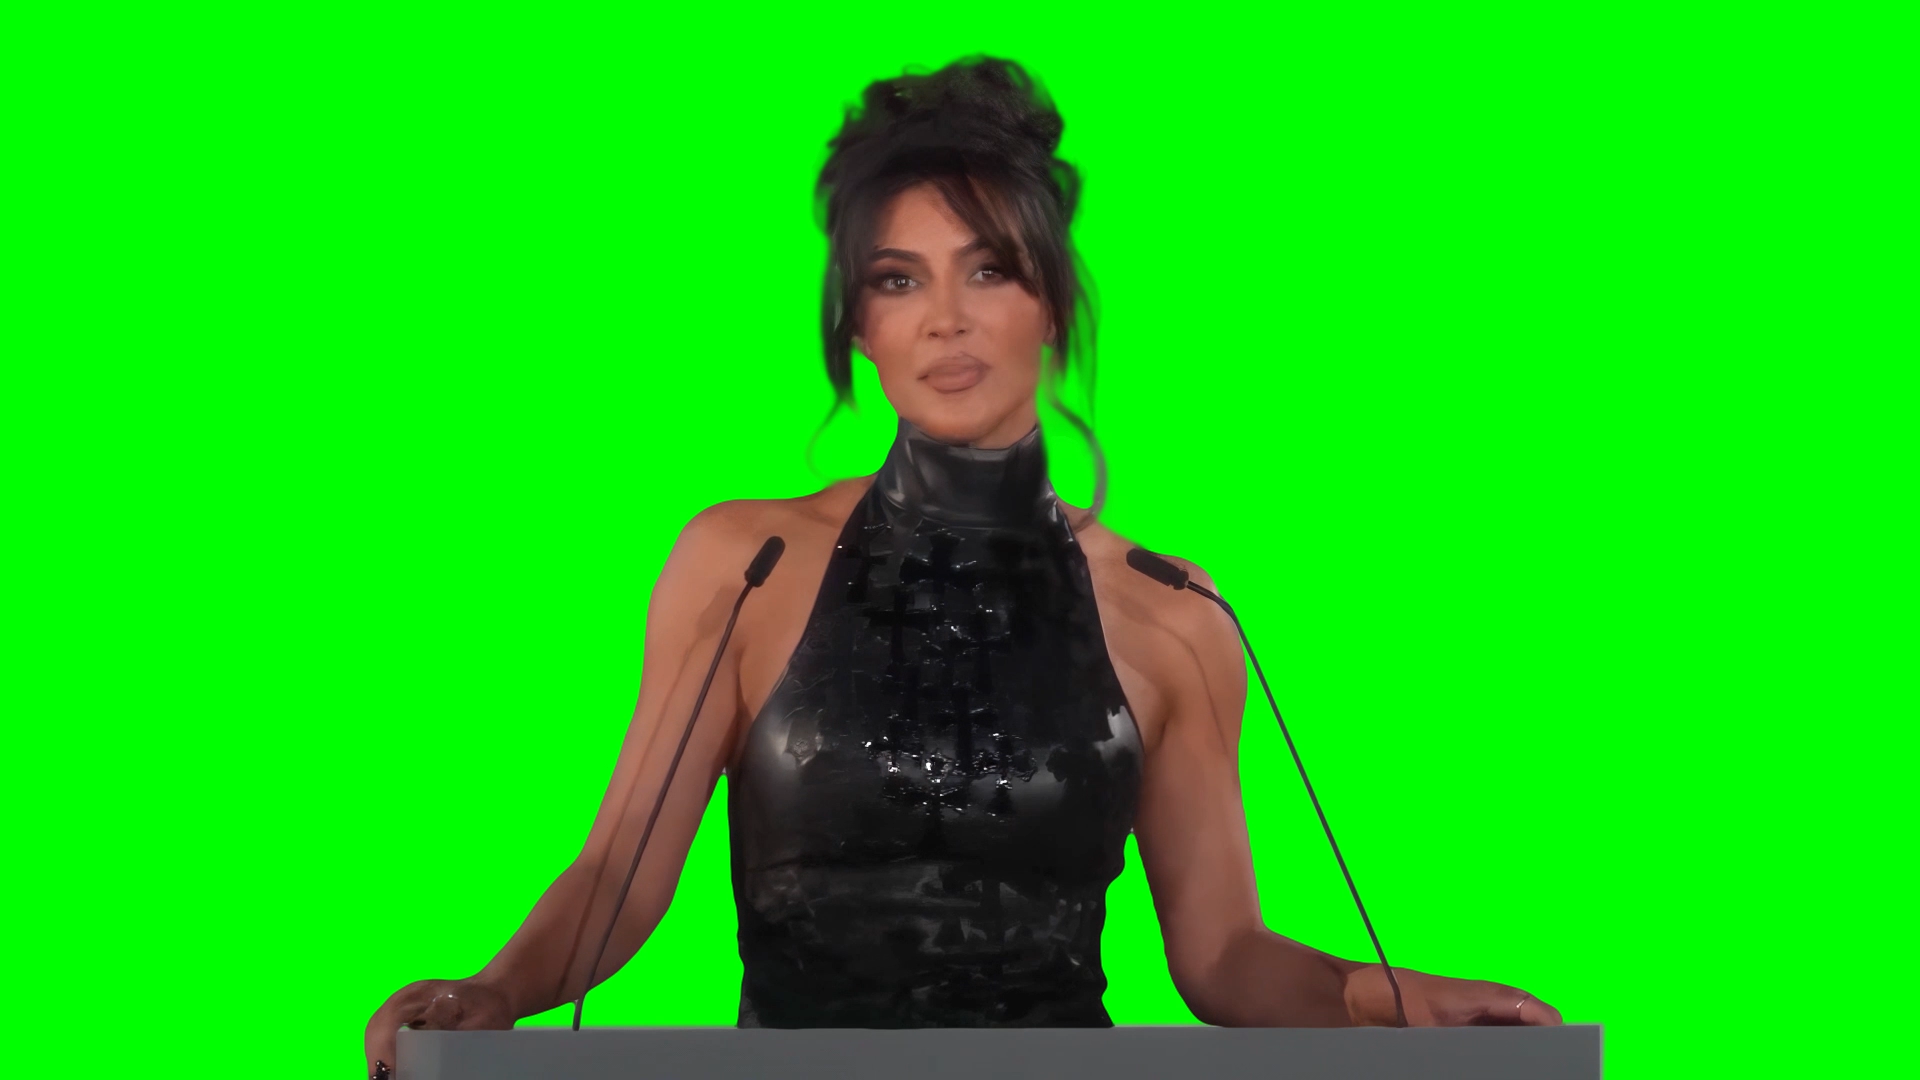 Kim Kardashian - Fearless, Heroic, Authentic, Iconic, The Greatest Of All Time (Green Screen)